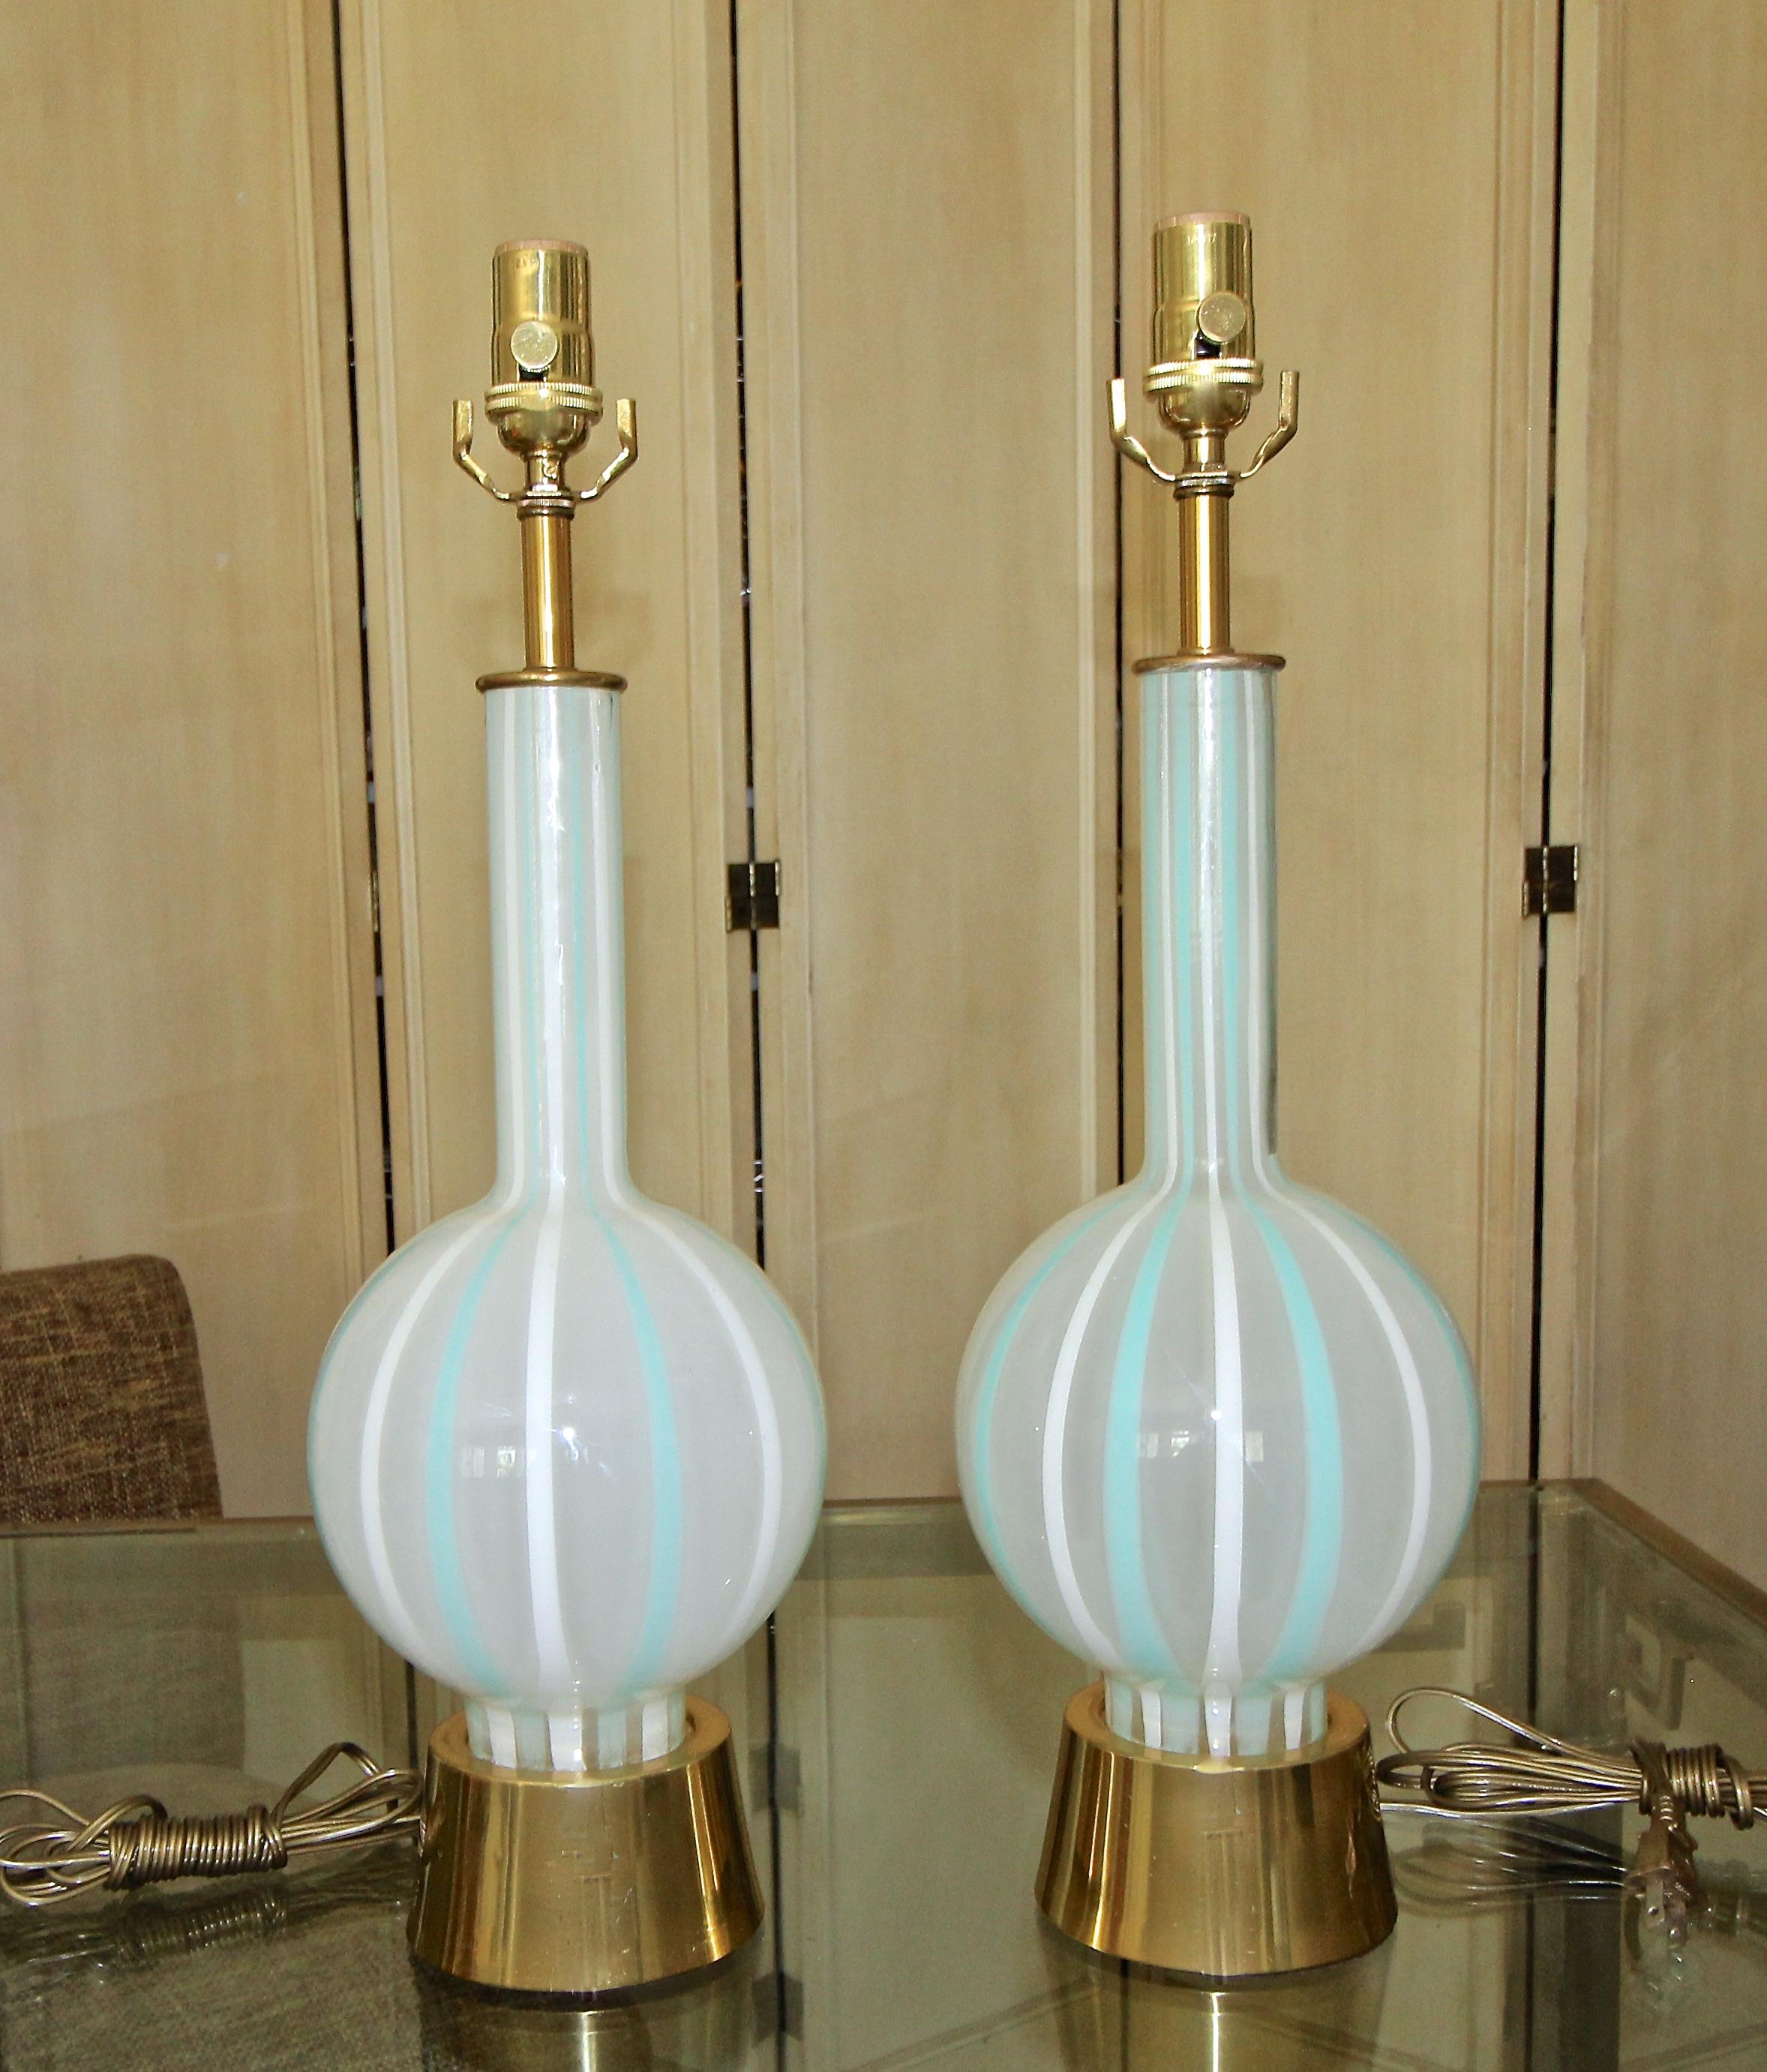 Pair of midcentury frosted glass with striped painted teal (aqua blue) and white table lamps, mounted on original brass-plated metal bases. Newly wired. The decorative lamps have an appealing fresh vibe, making them a great addition to a modern or